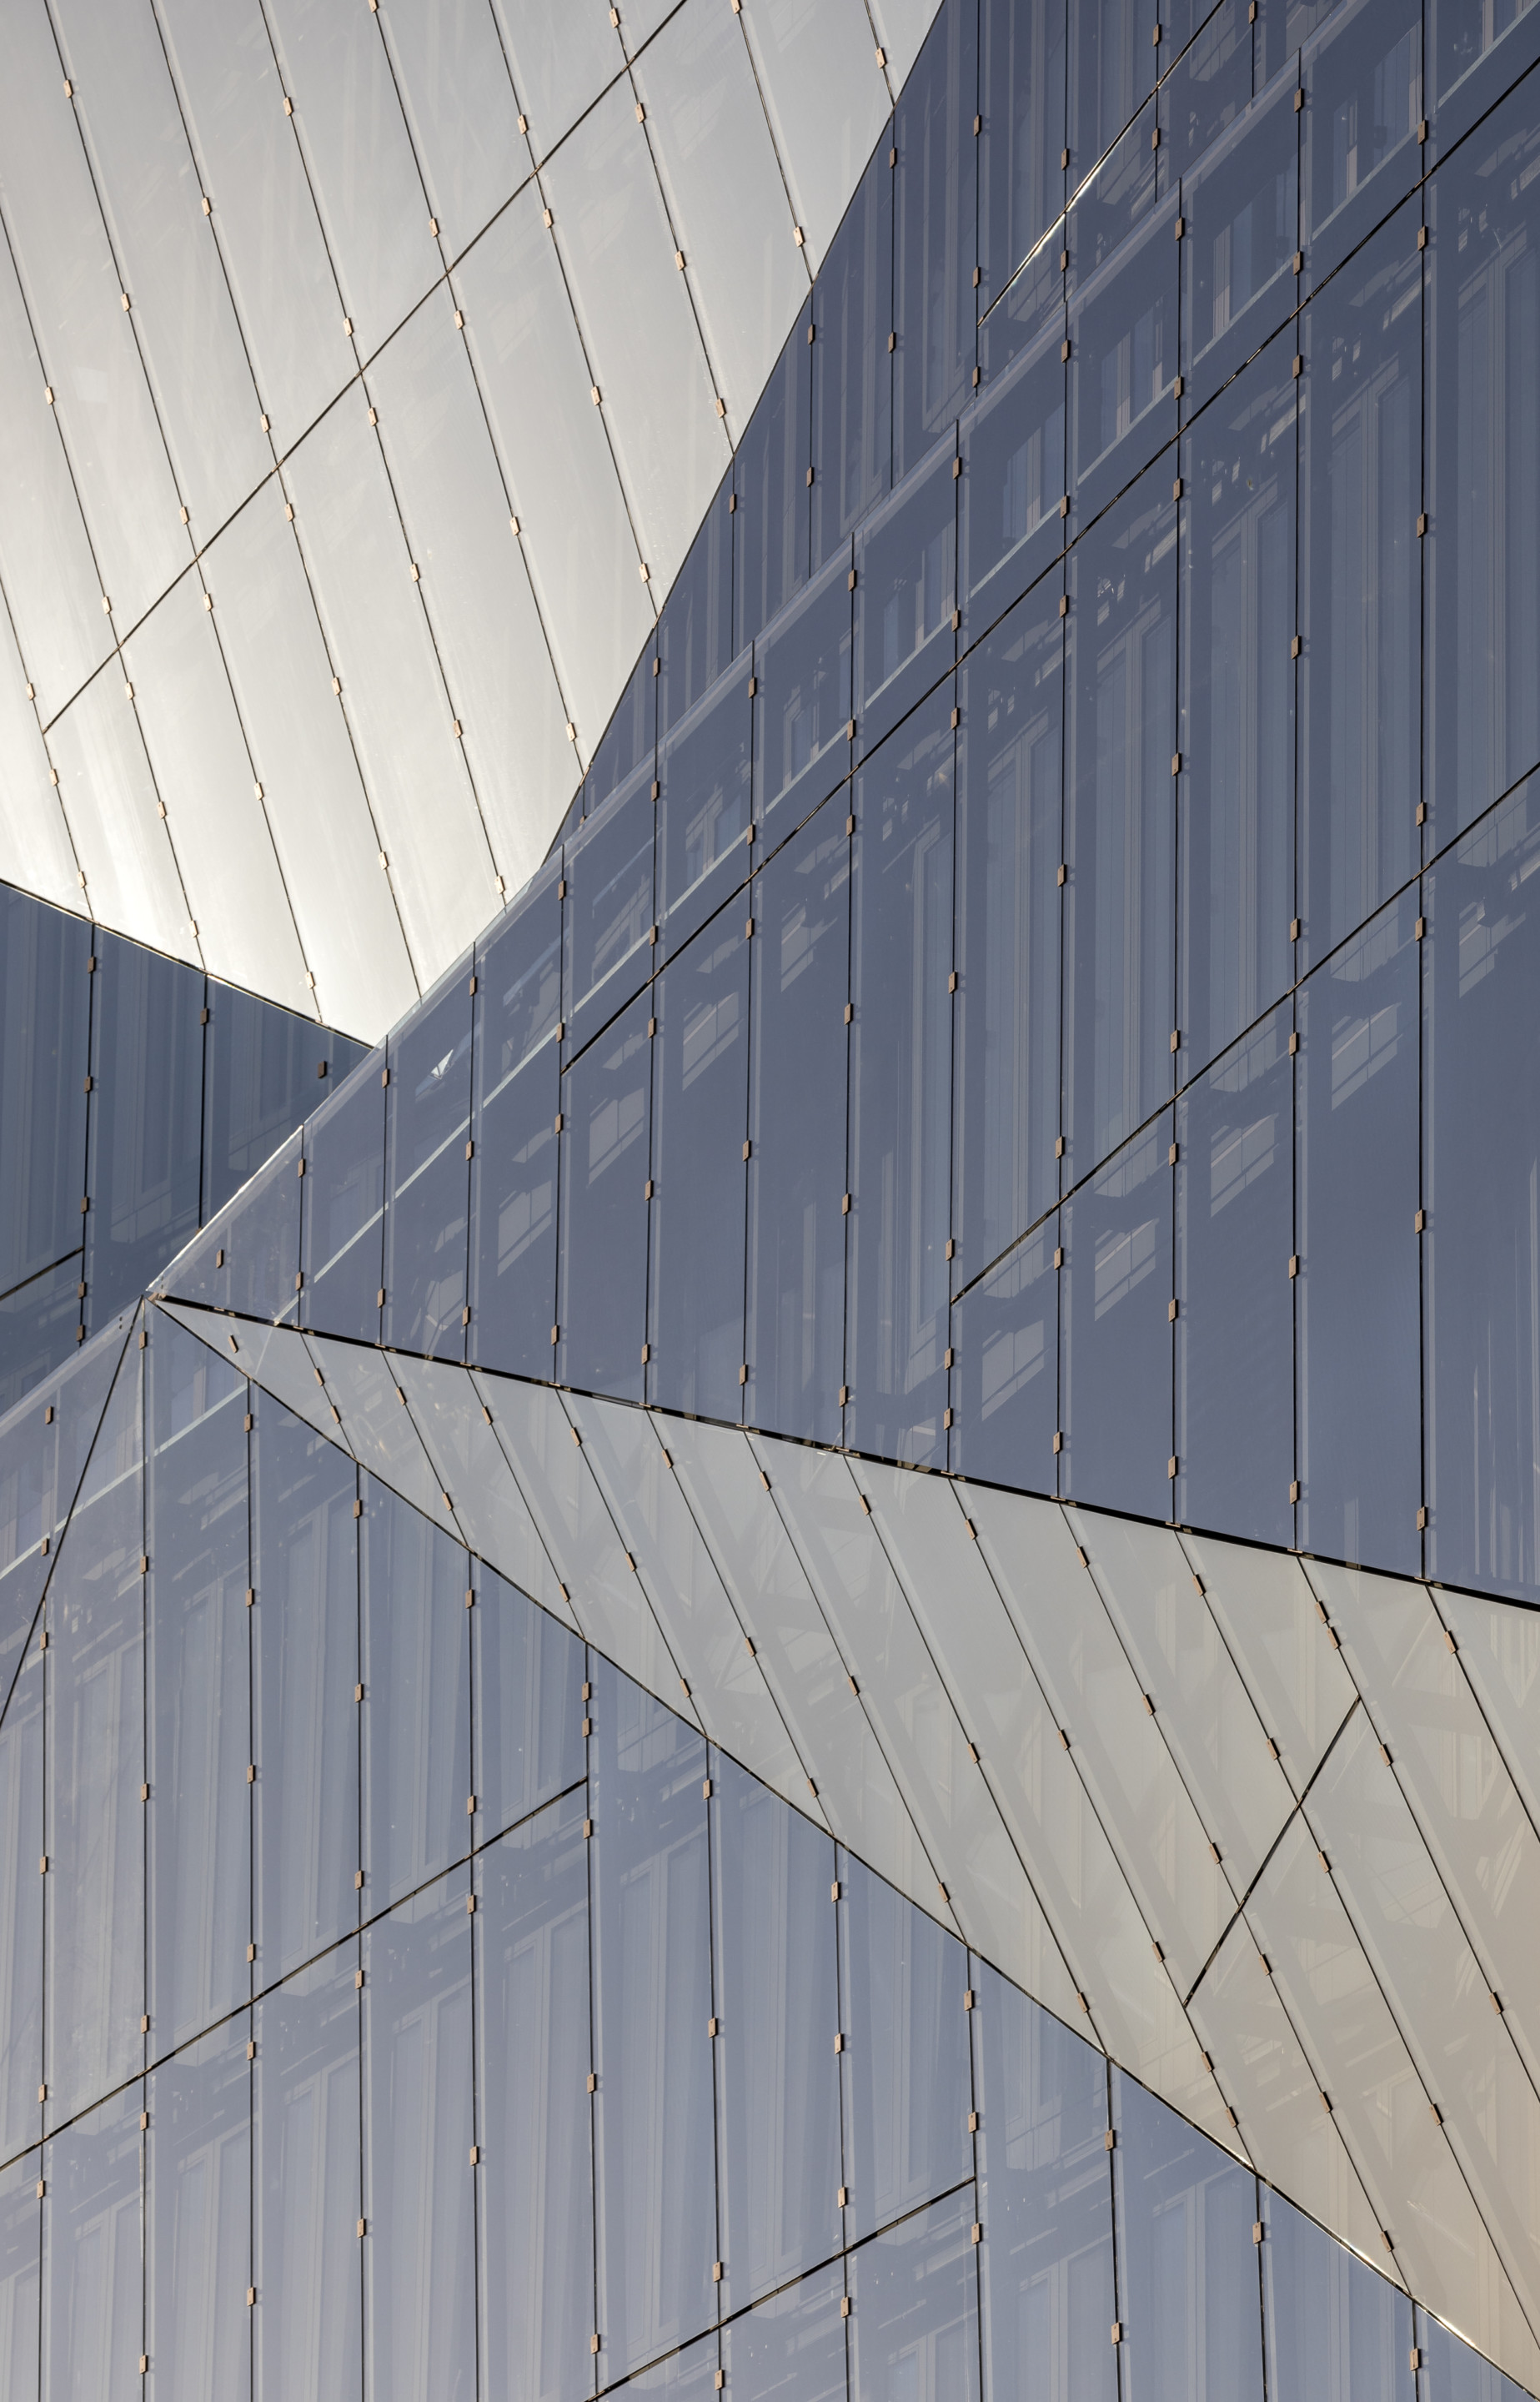 Detail image of the cube berlin facade